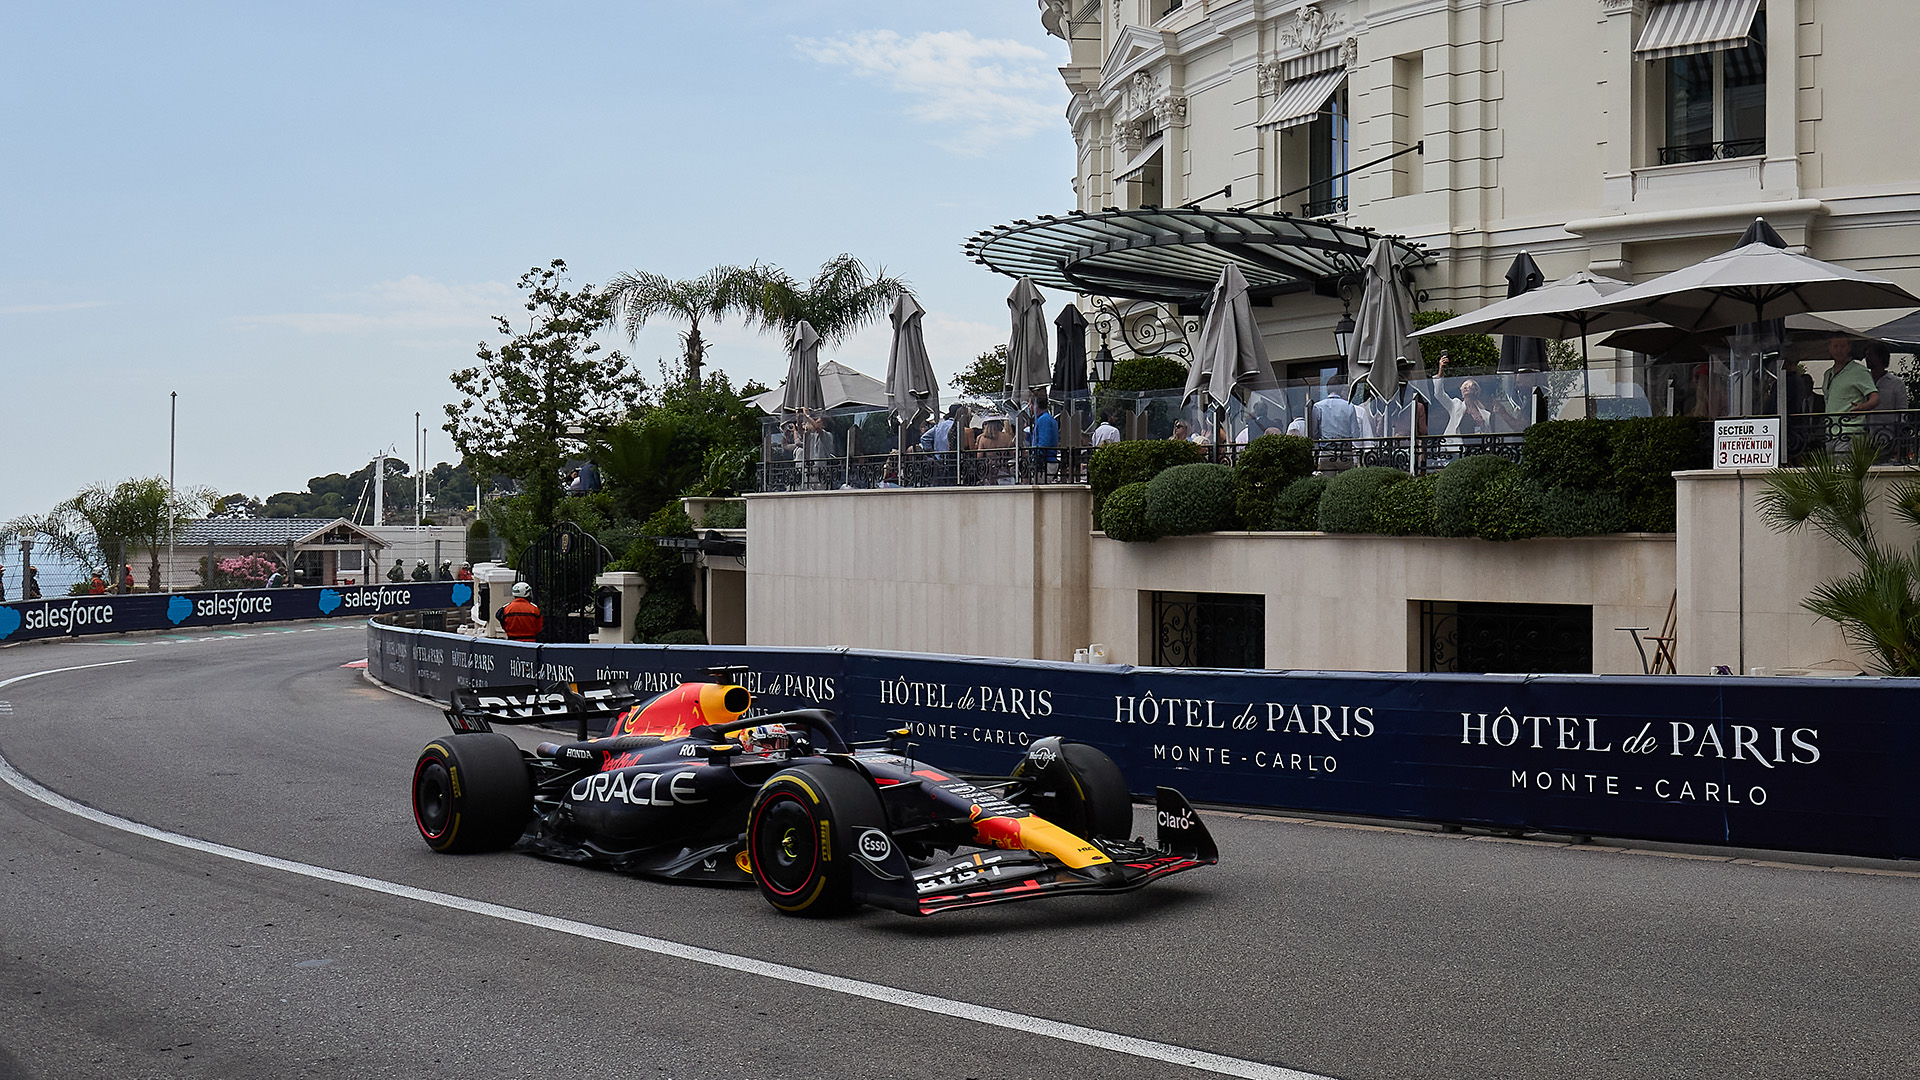 MONTE-CARLO, MONACO - MAY 28: Max Verstappen of Netherlands and Oracle Red Bull Racing drives on track during the F1 Grand Prix of Monaco at Circuit de Monaco on May 28, 2023 in Monte-Carlo, Monaco. (Photo by Emmanuele Ciancaglini/Ciancaphoto Studio/Getty Images)